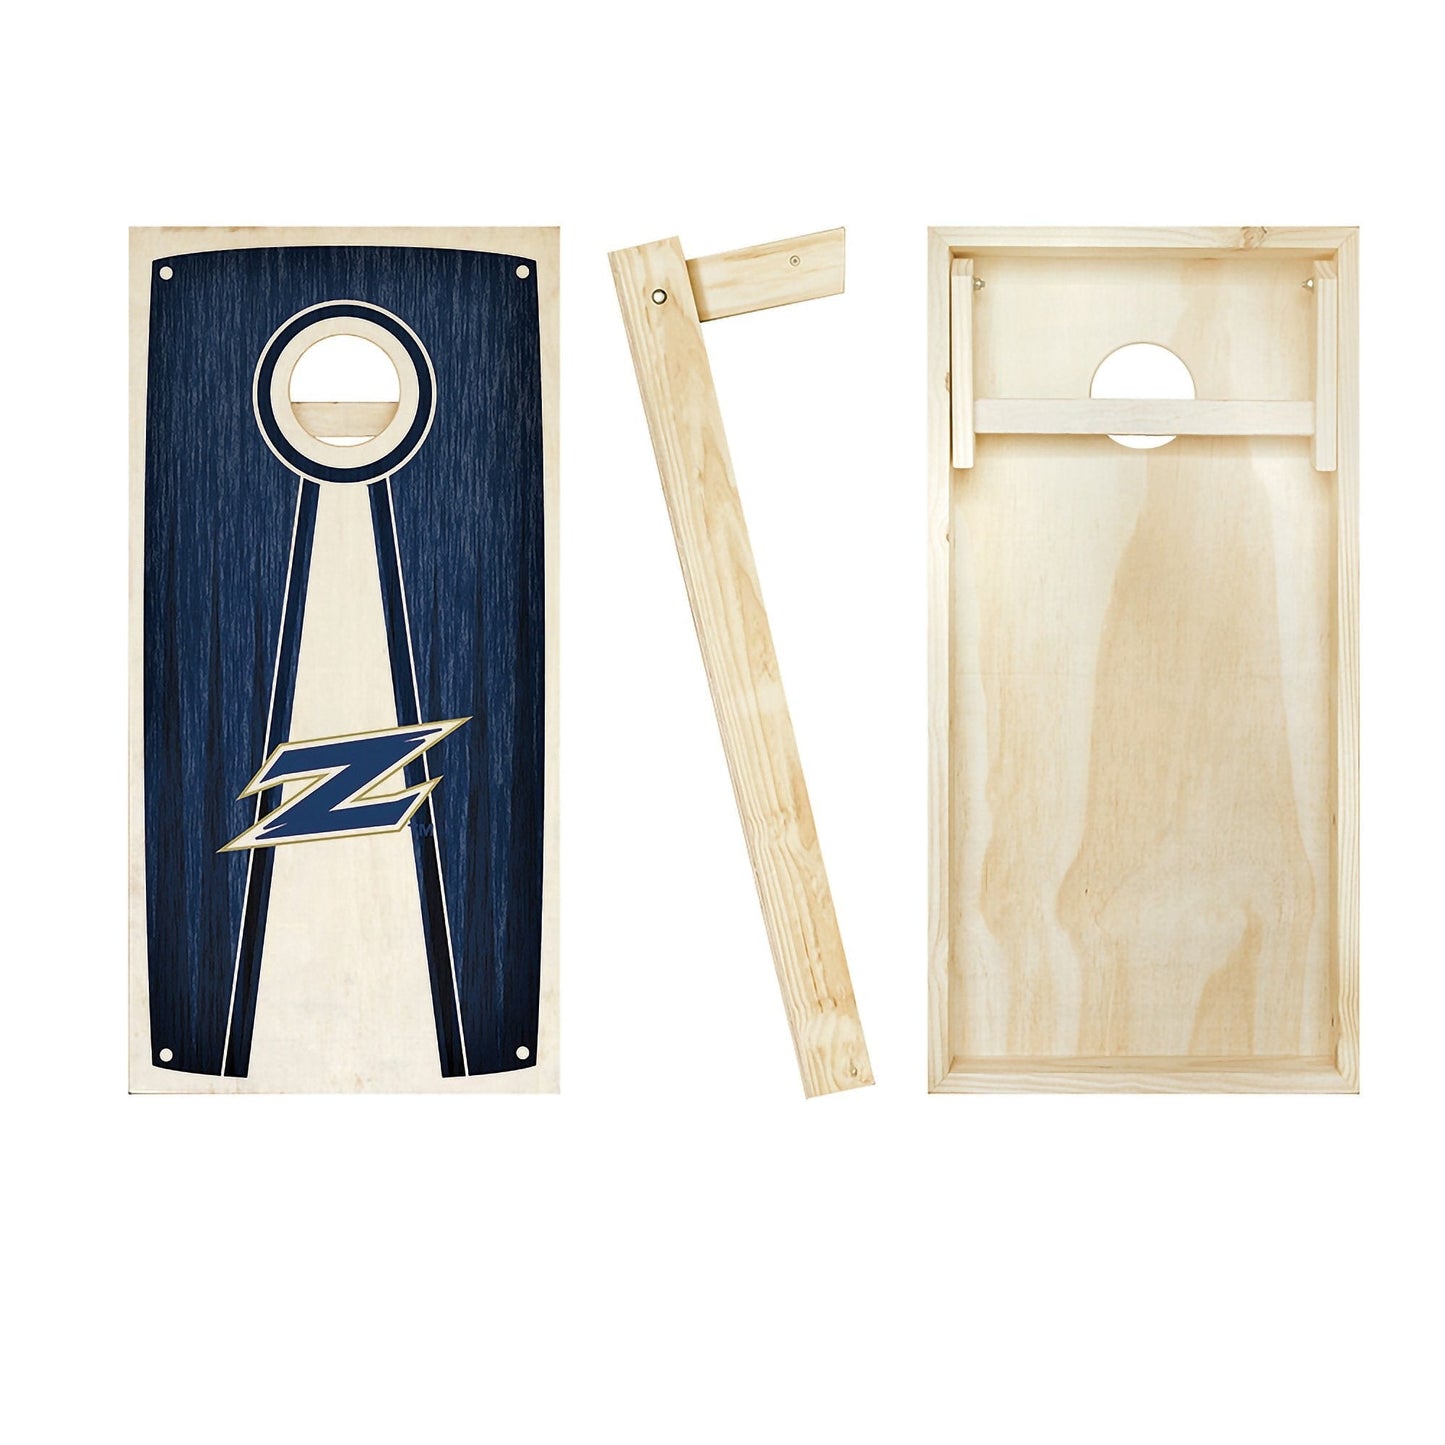 Akron Zips Stained Pyramid board entire set